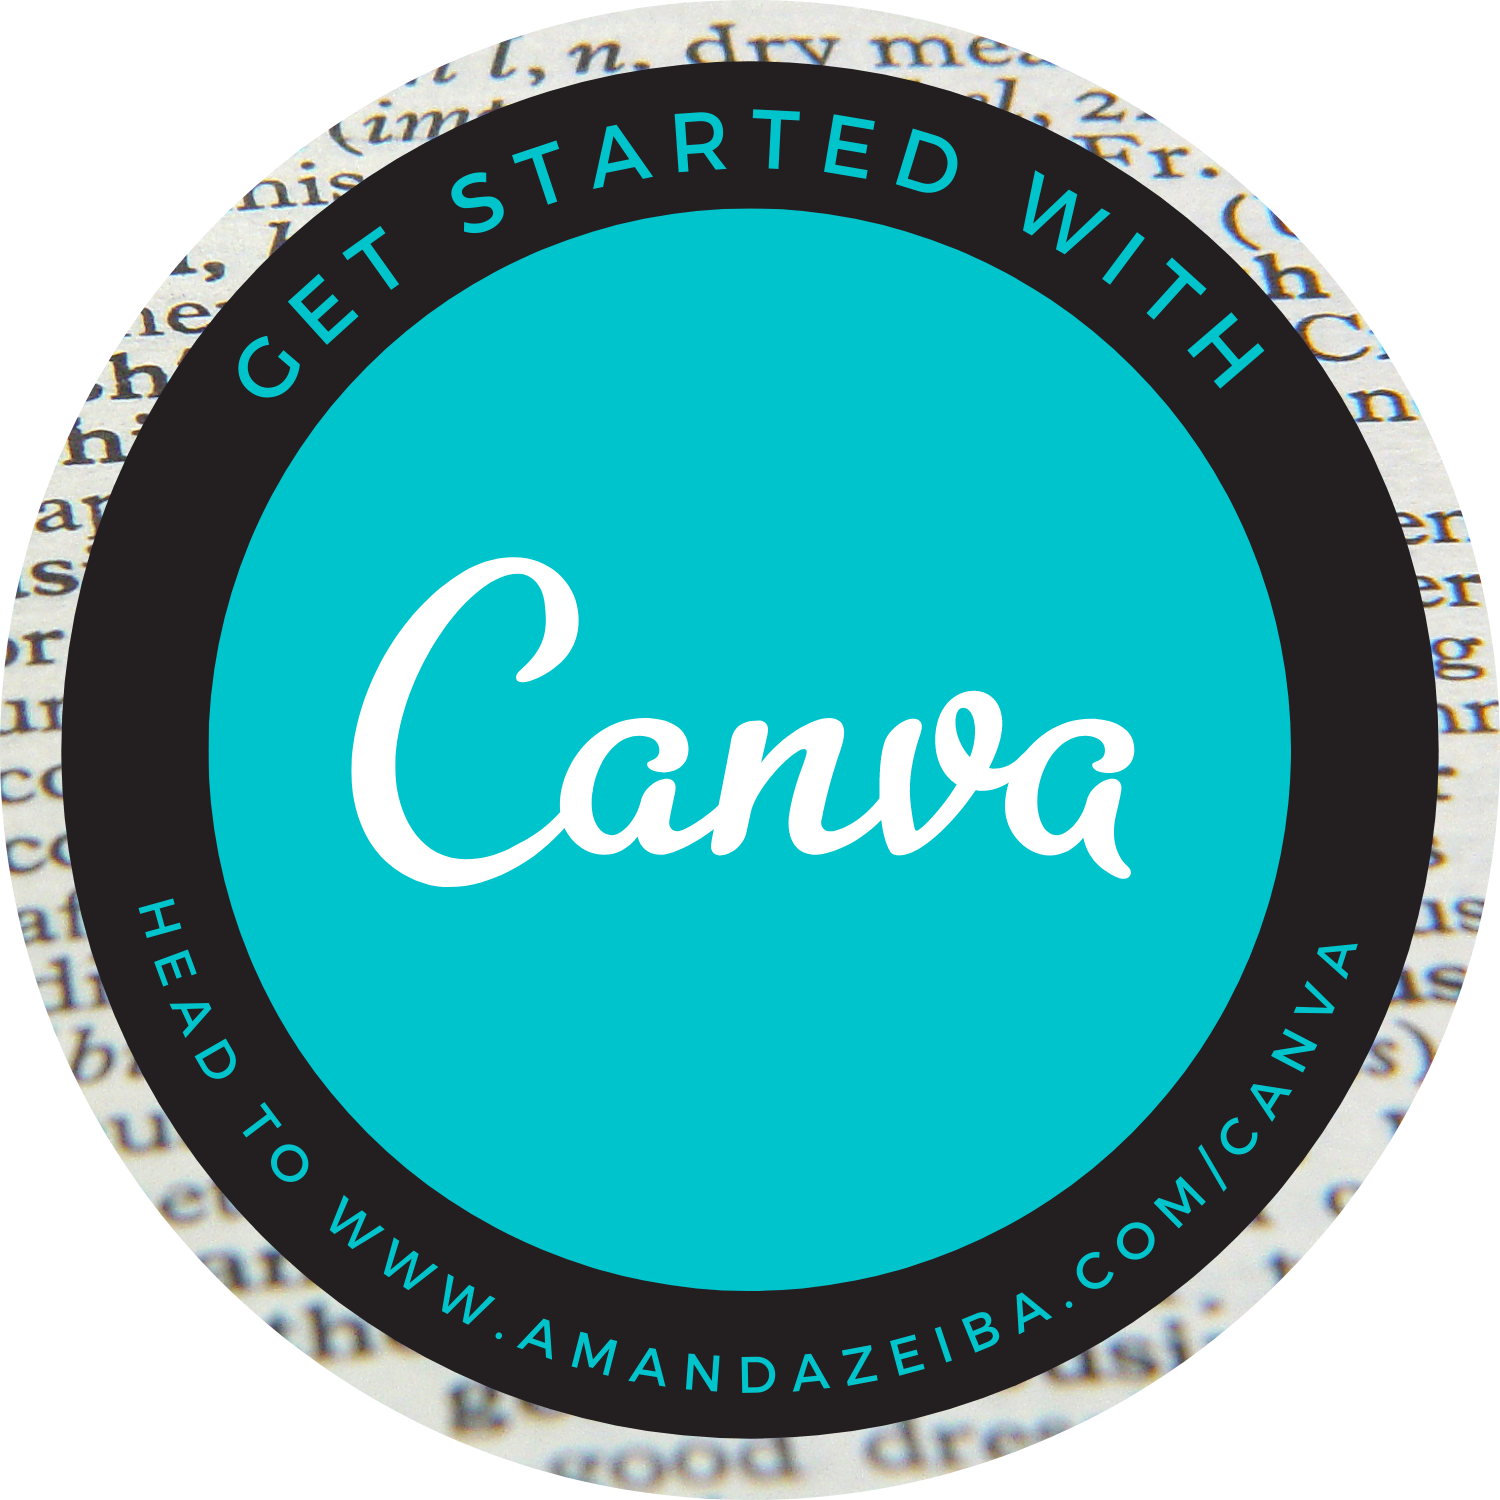 Get started with Canva today!